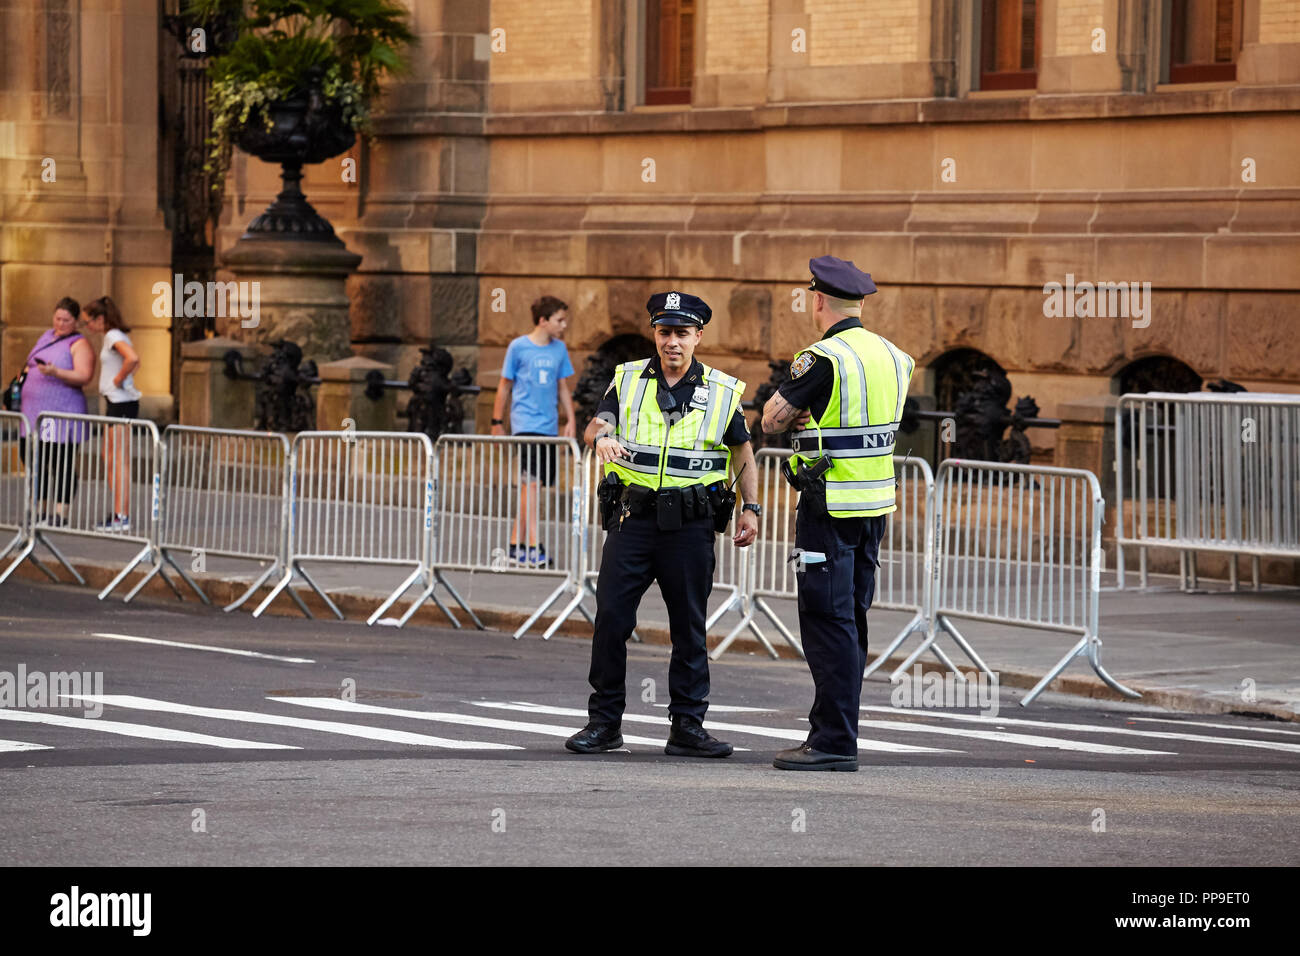 New York, USA - July 01, 2018: New York Police Department secures NYC Triathlon. Stock Photo